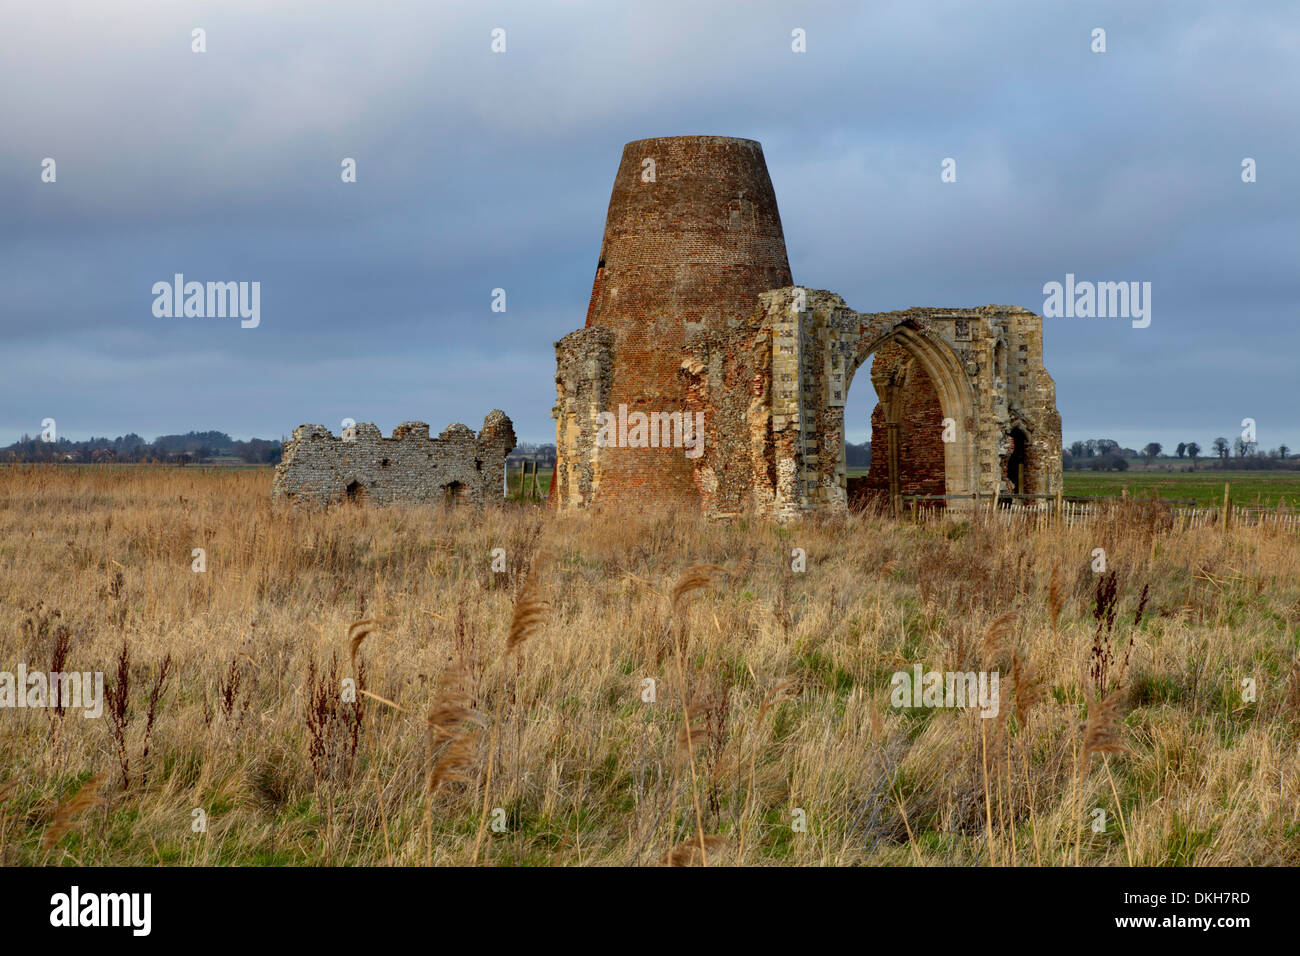 The remains of the 14th century St. Benet's Abbey and the windmill built within its walls near Ludham, Norfolk, England, UK Stock Photo